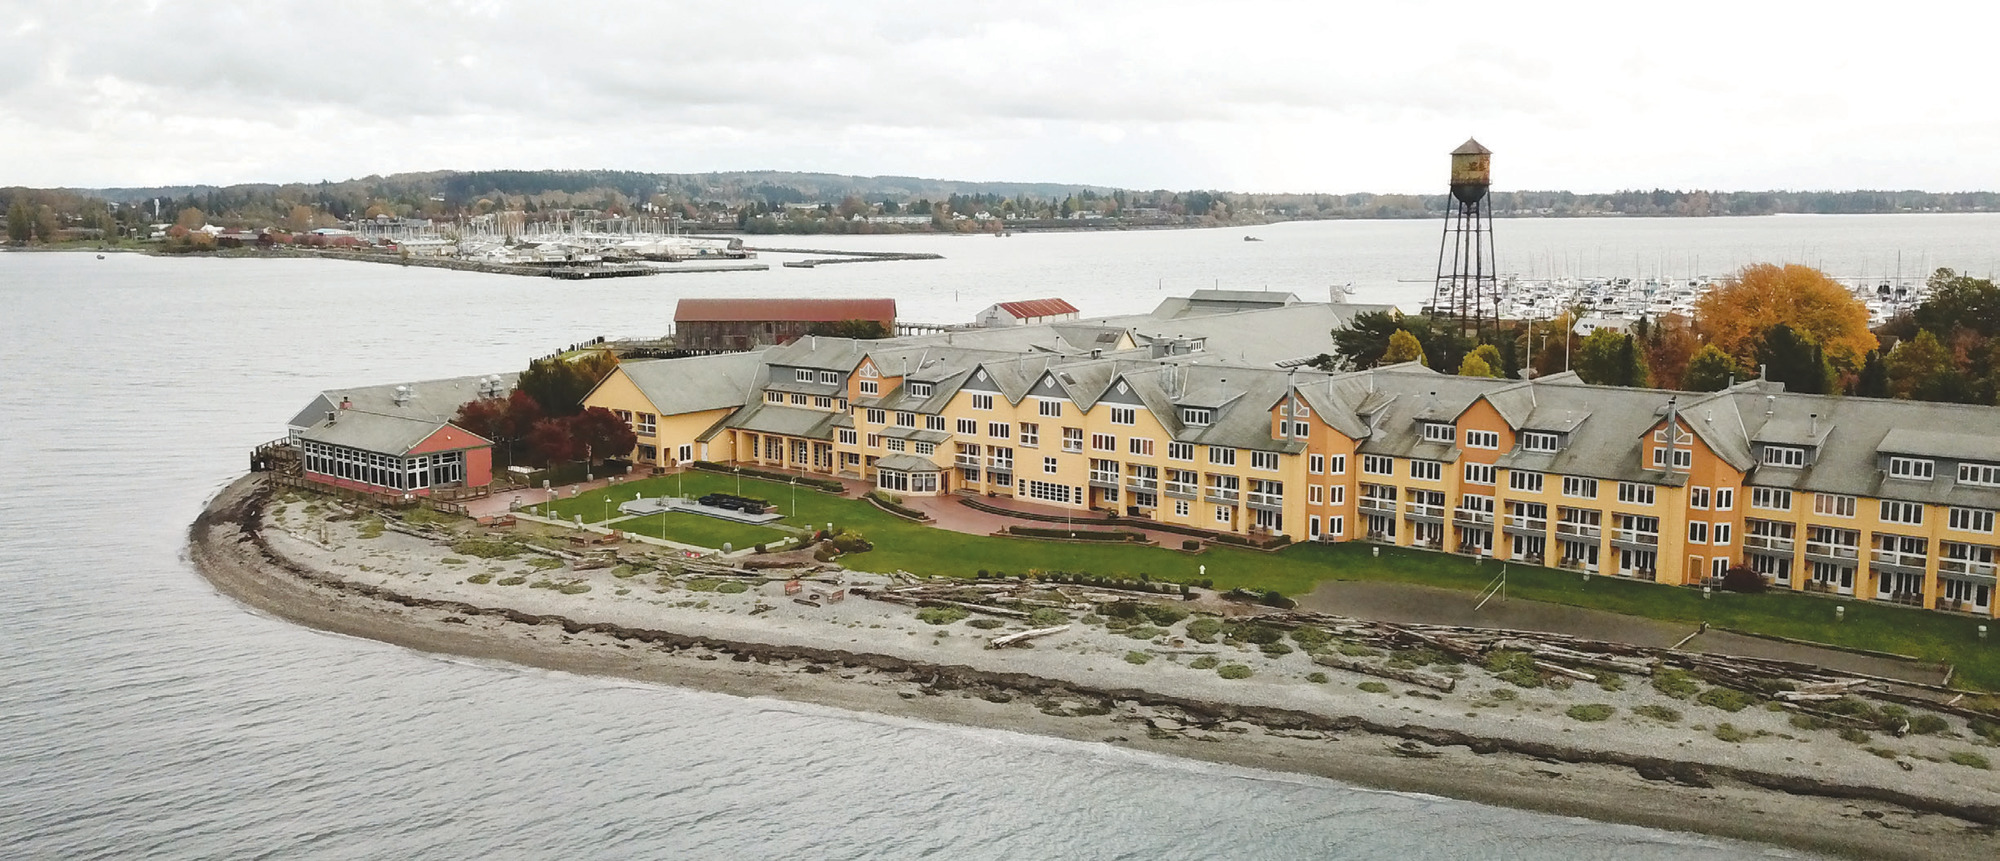 The resort sits on a spit in the Salish Sea.